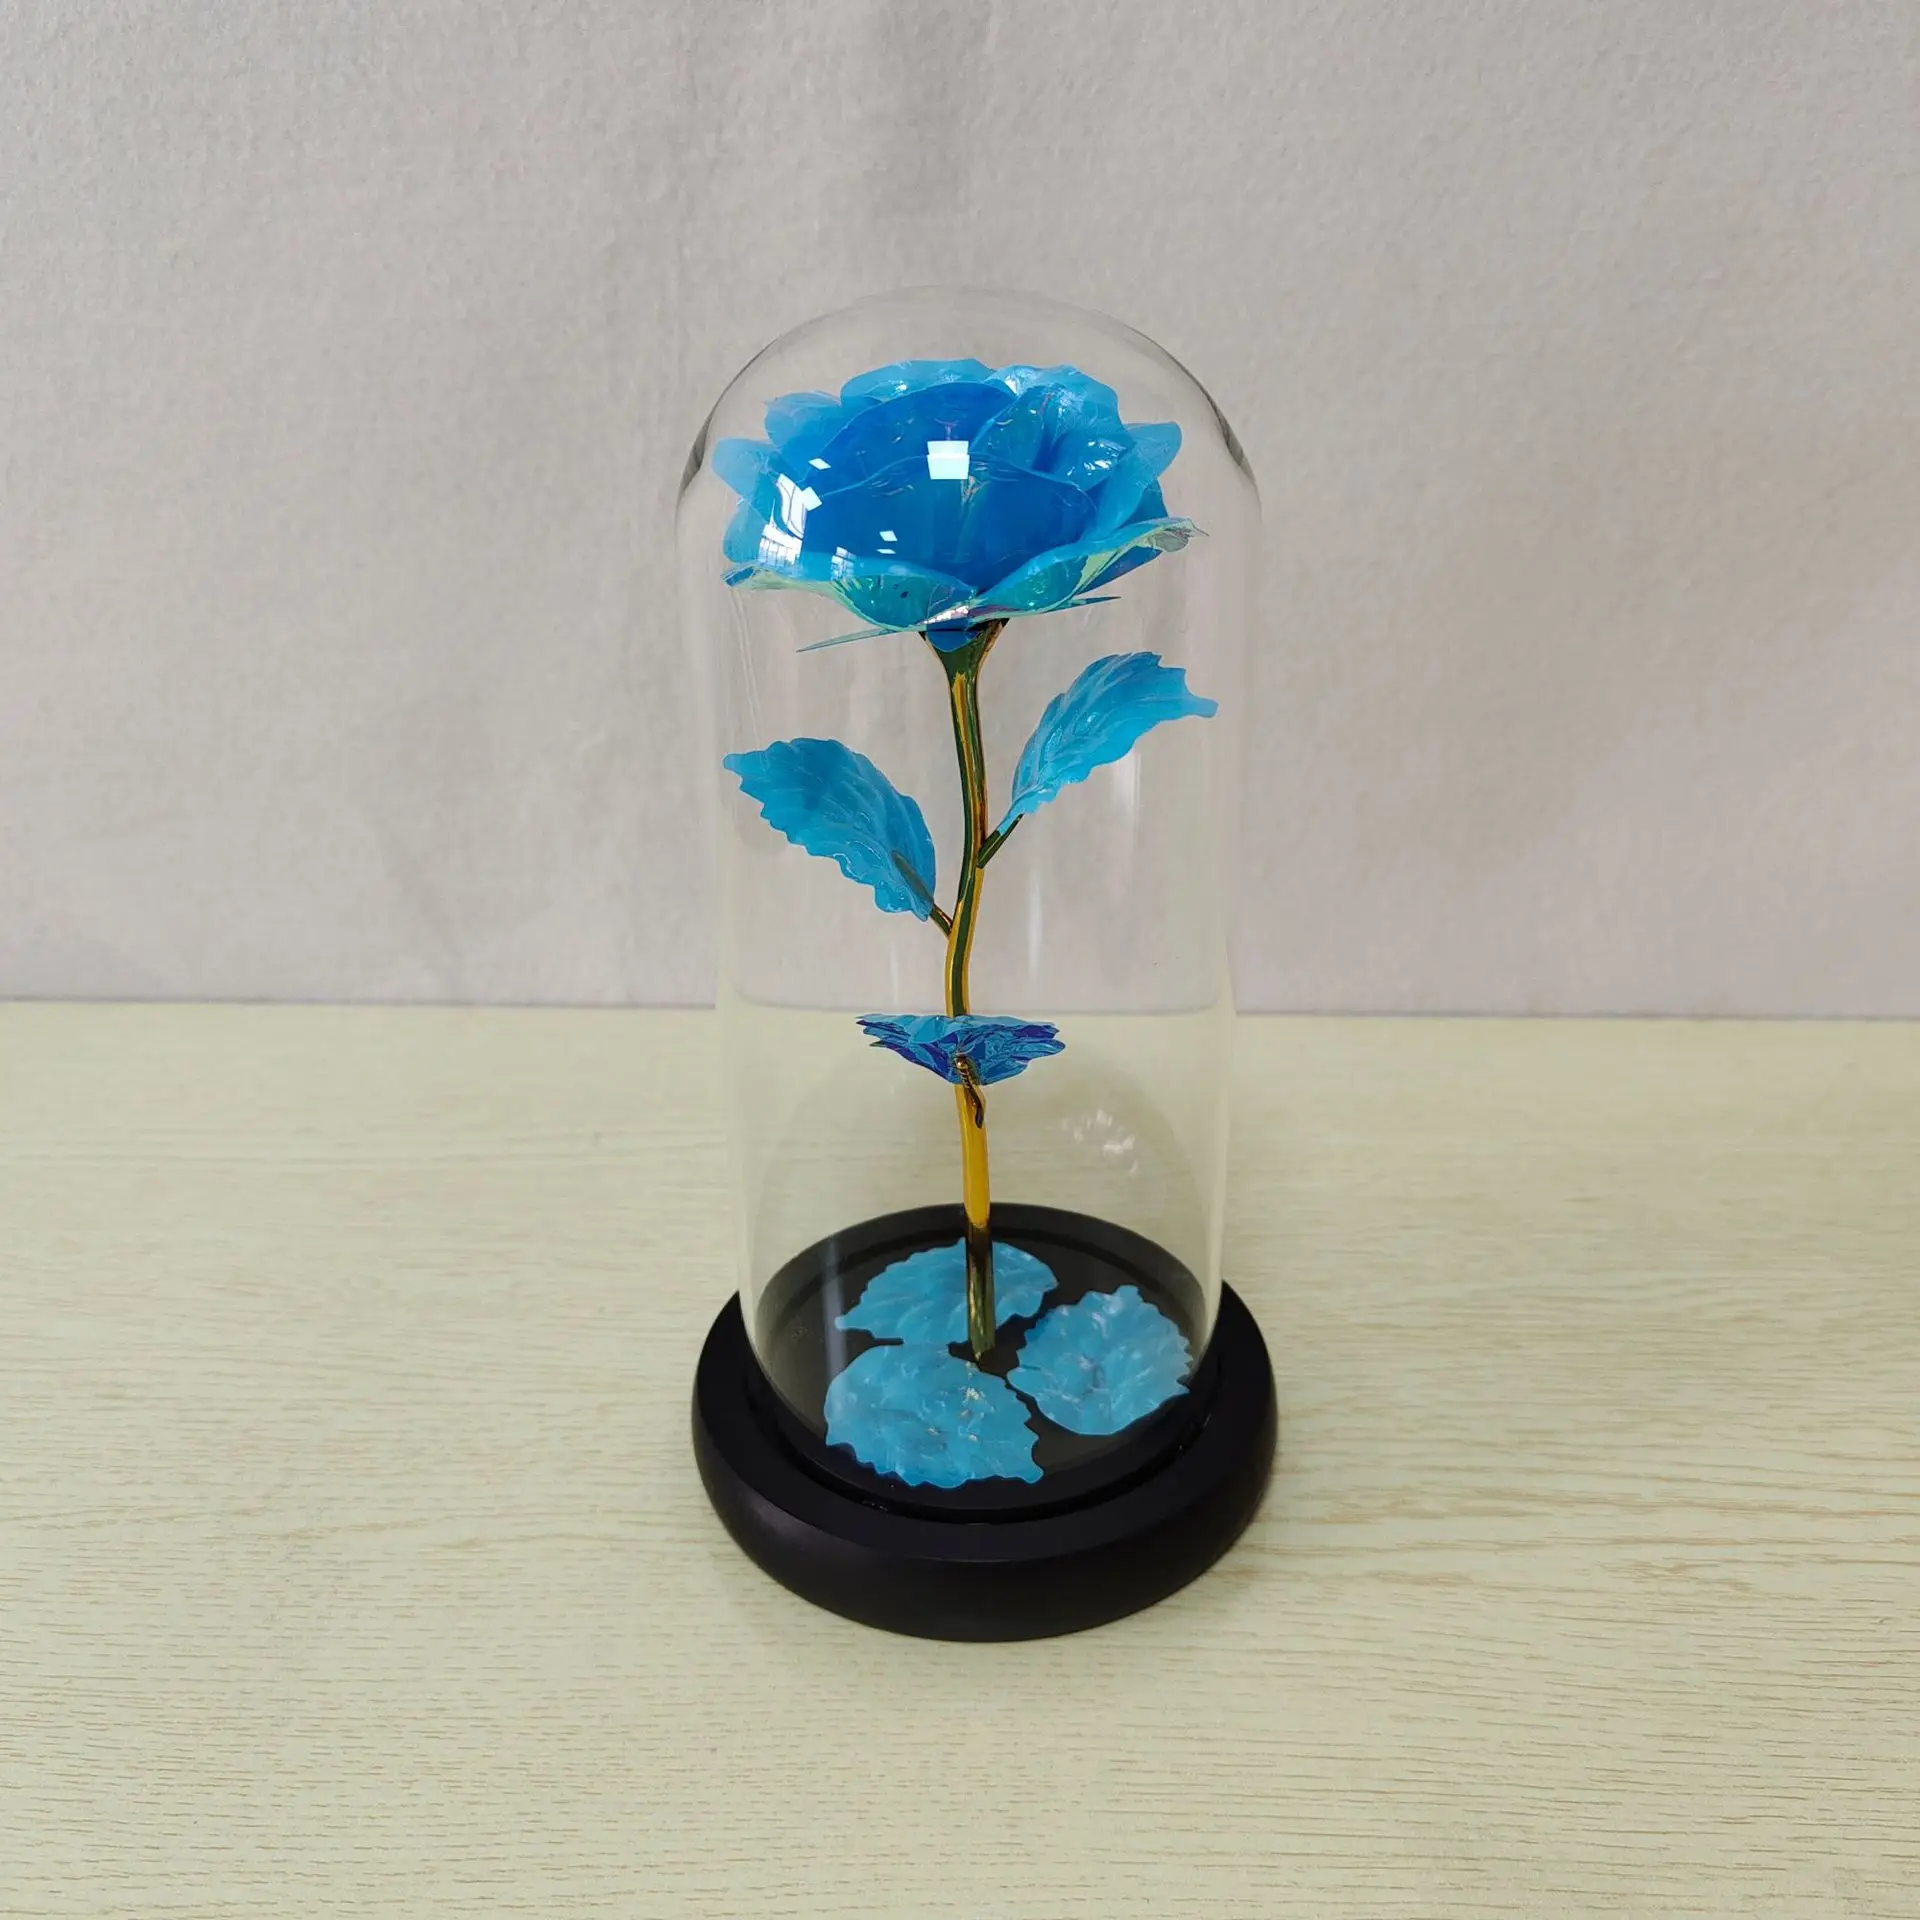 Mini Eternal Roses Preserved Natural Eternal Rose Colombia Eternal Rose In  Glass Dome Led Lights - Buy Artificial Flower For Home Decor,Mothers Day, Rose Preserve In Glass Dome Product on Alibaba.com